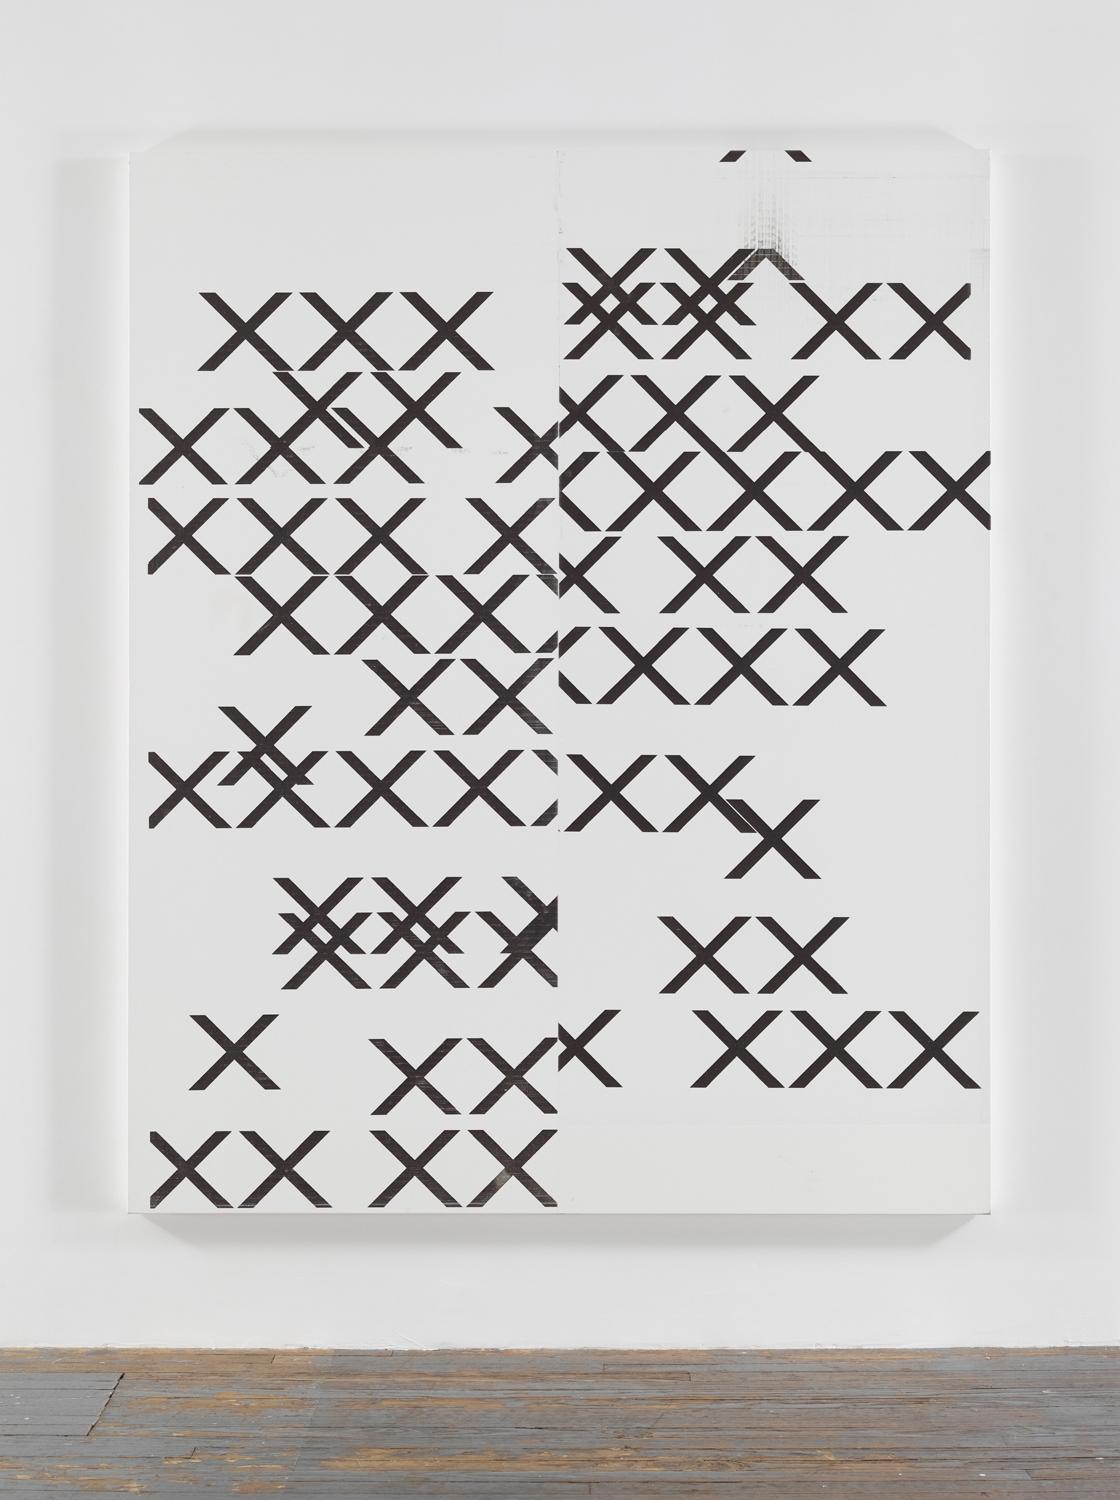 Painting with a series of x's by Wade Guyton